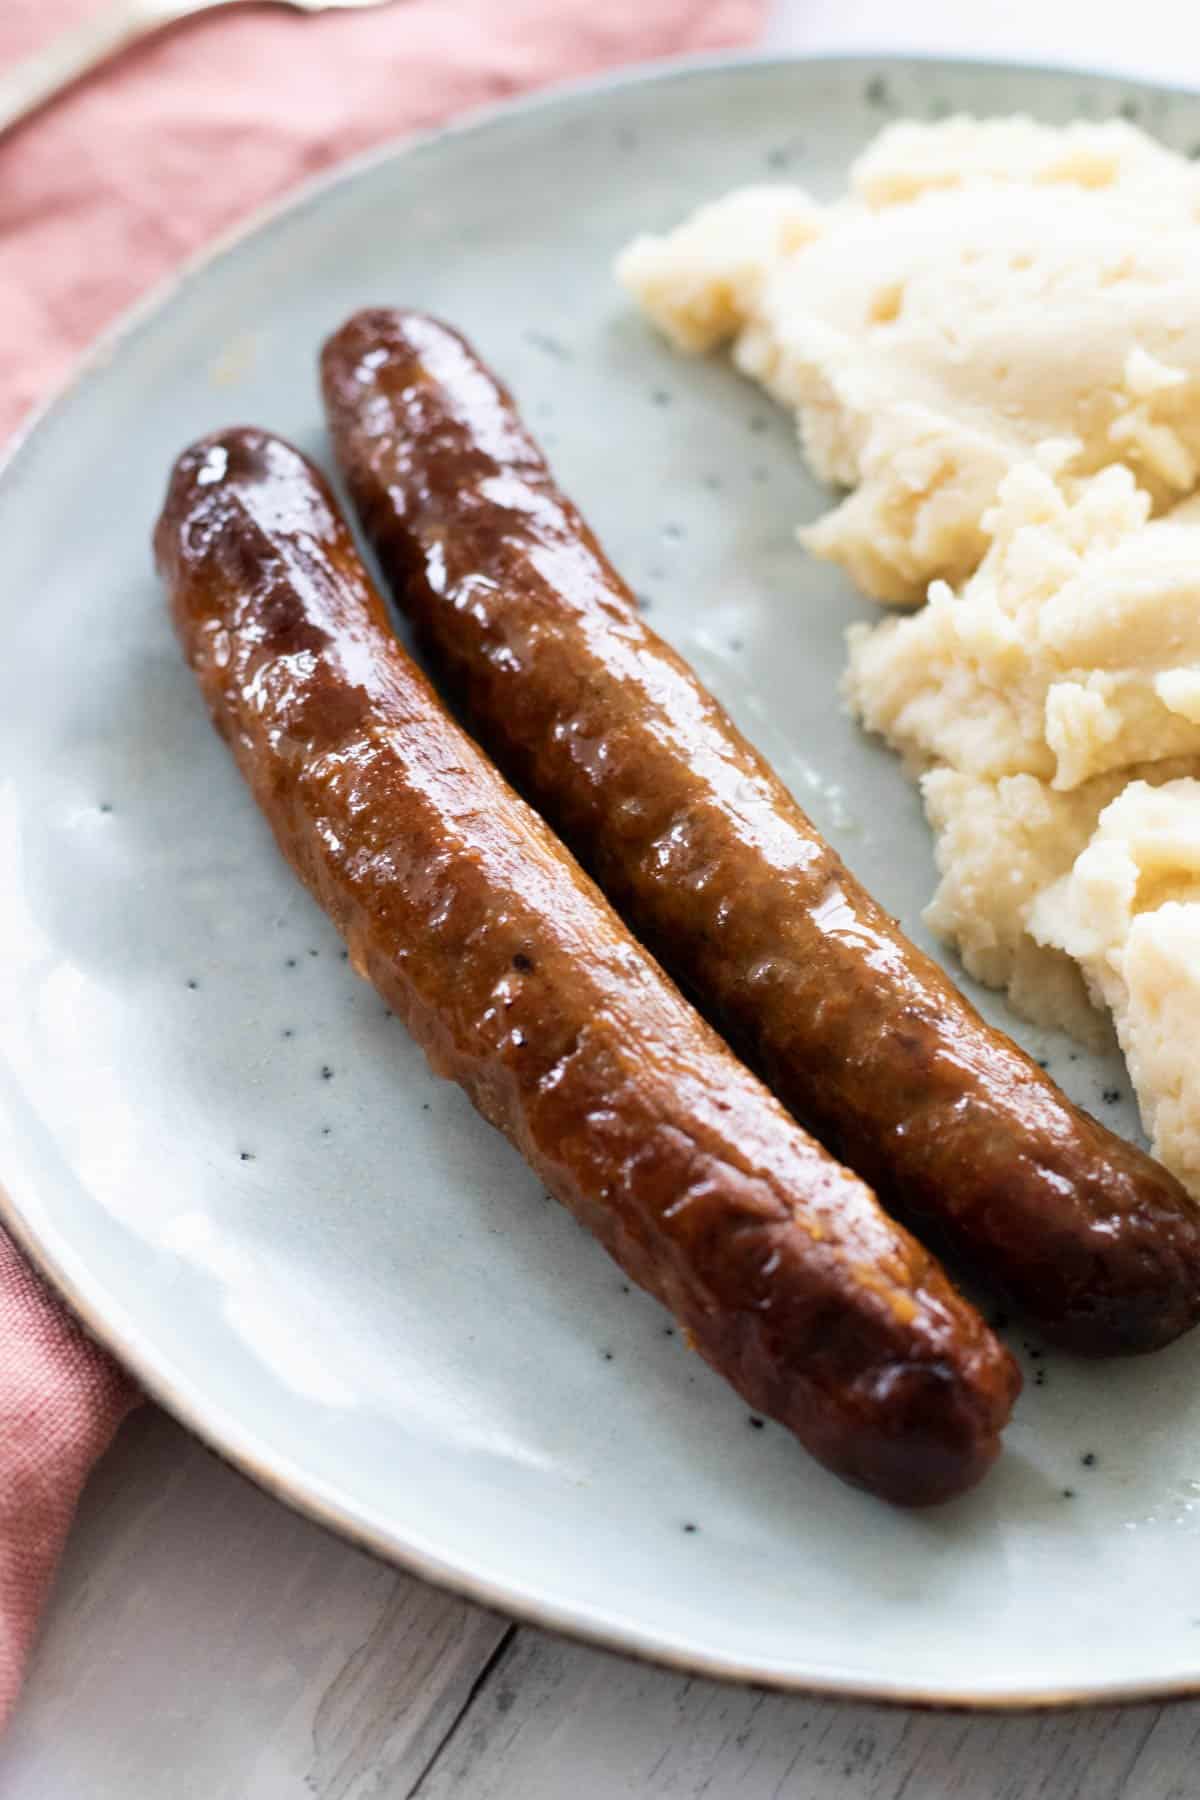 two sausages next to mashed potatoes.